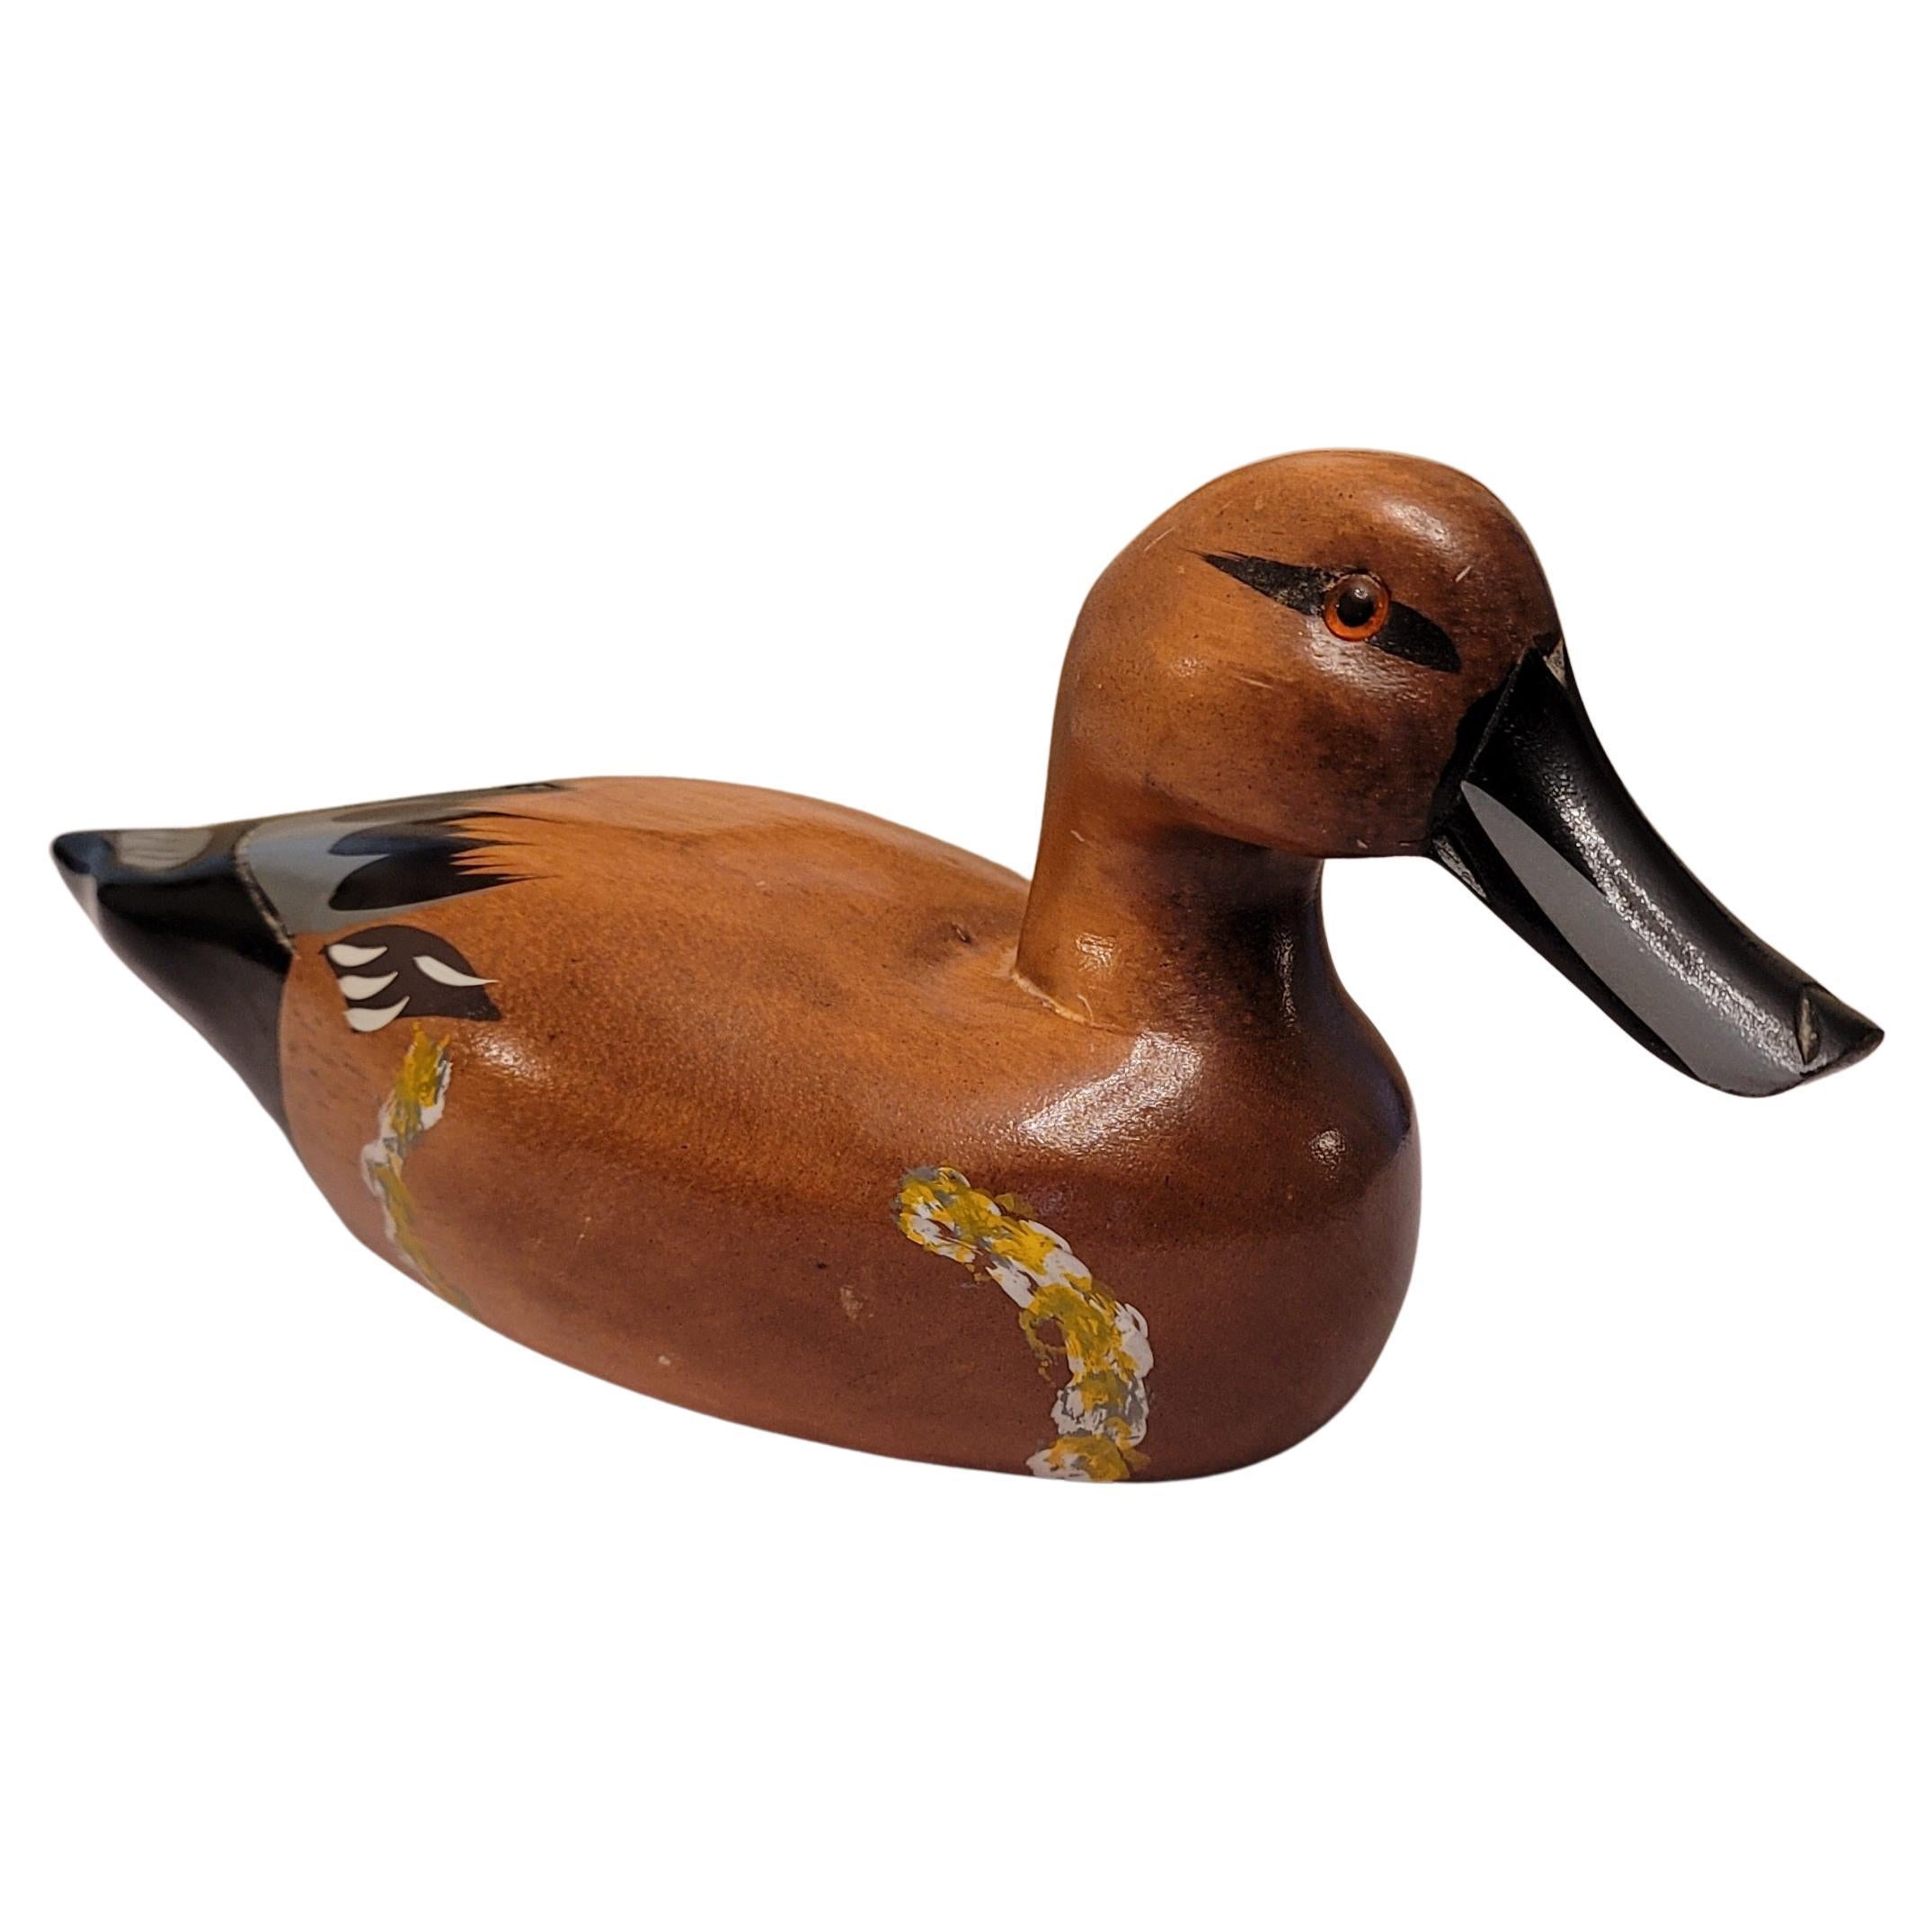 carved duck decoys